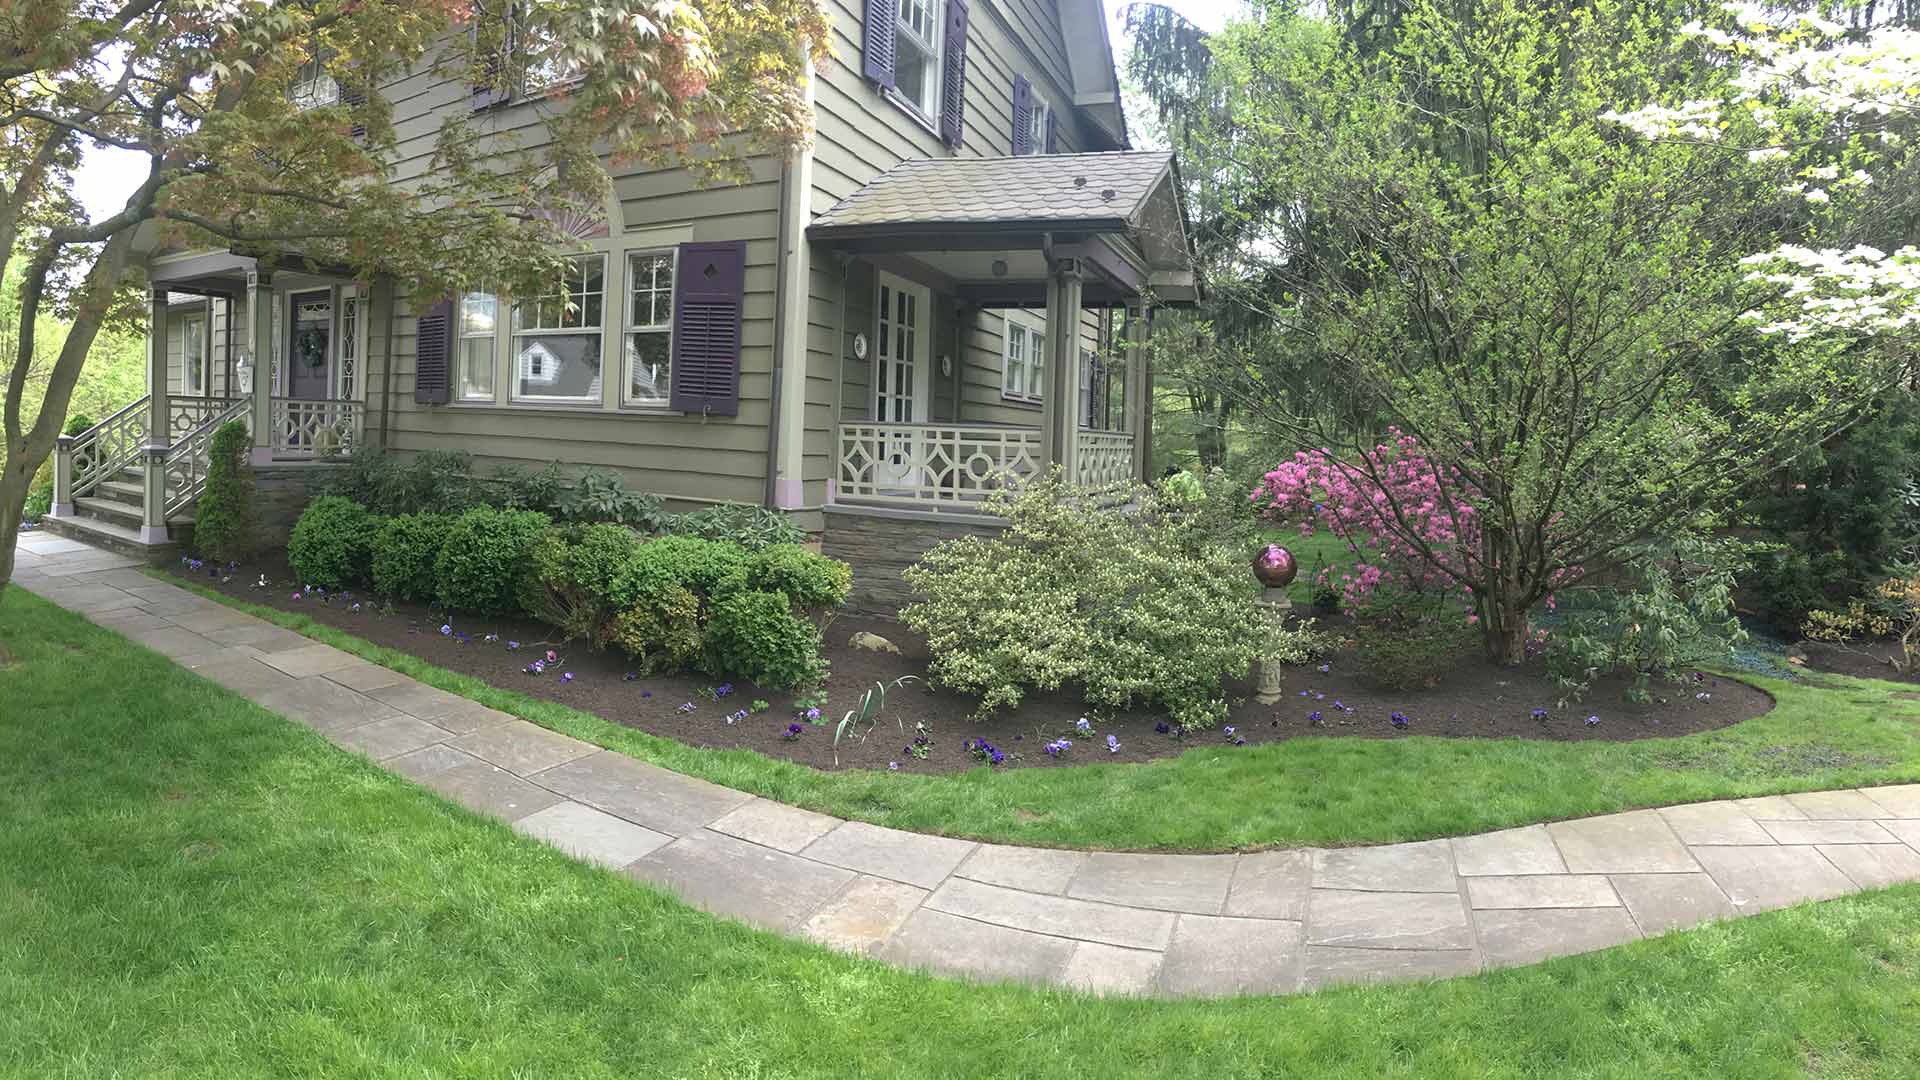 Yard around Westfield and Cranford, NJ after spring cleanup and mowing.